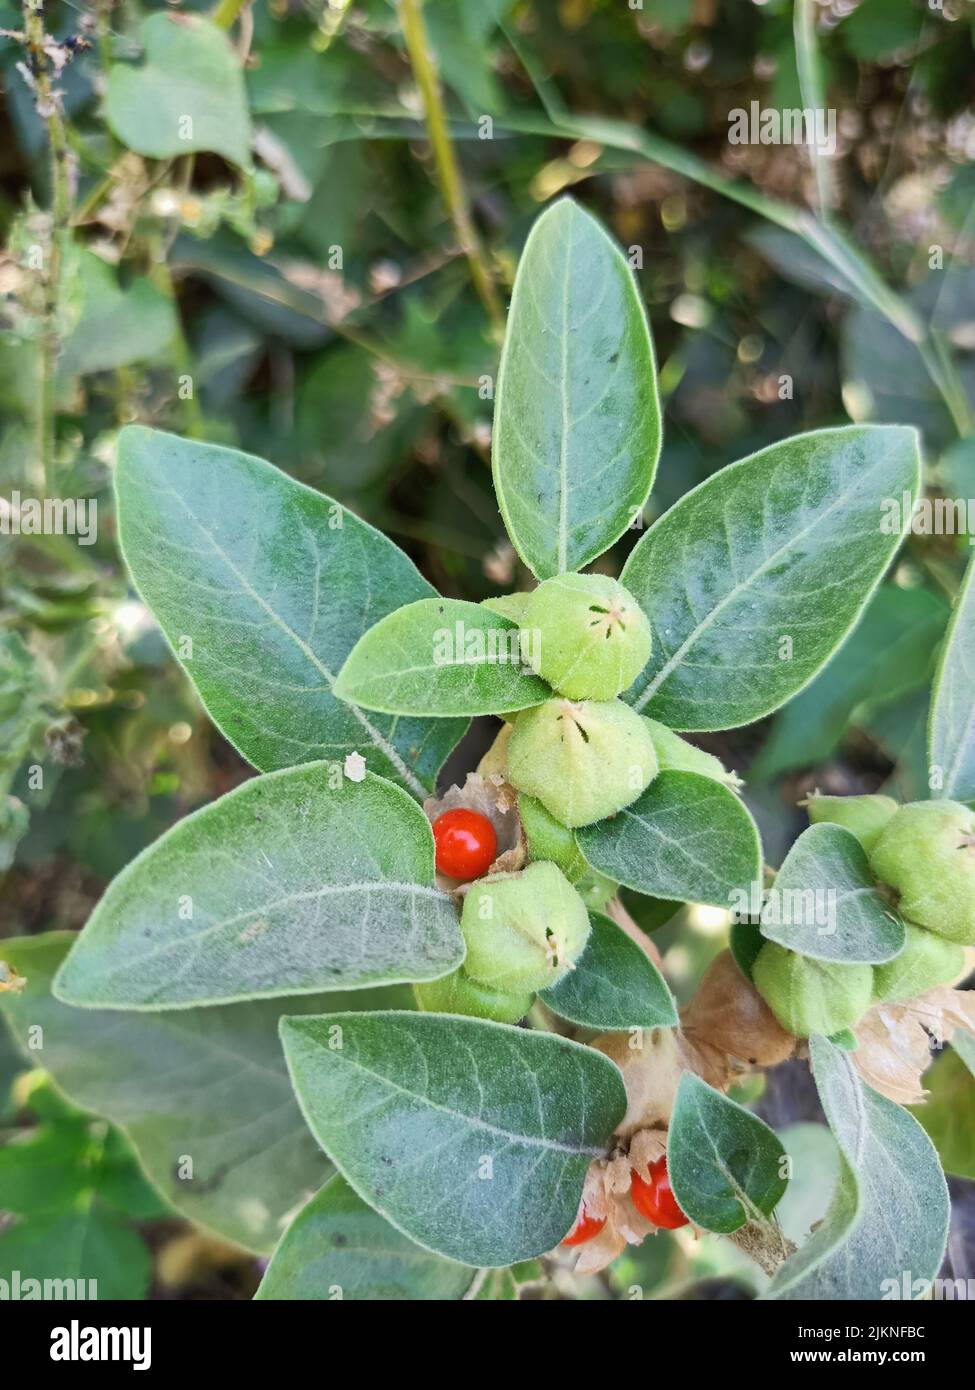 Ashwagandha medicinal plant used in ayurvedic medicines this plant also known as withania somnifera or winter cherry or indian ginseng plant u Stock Photo